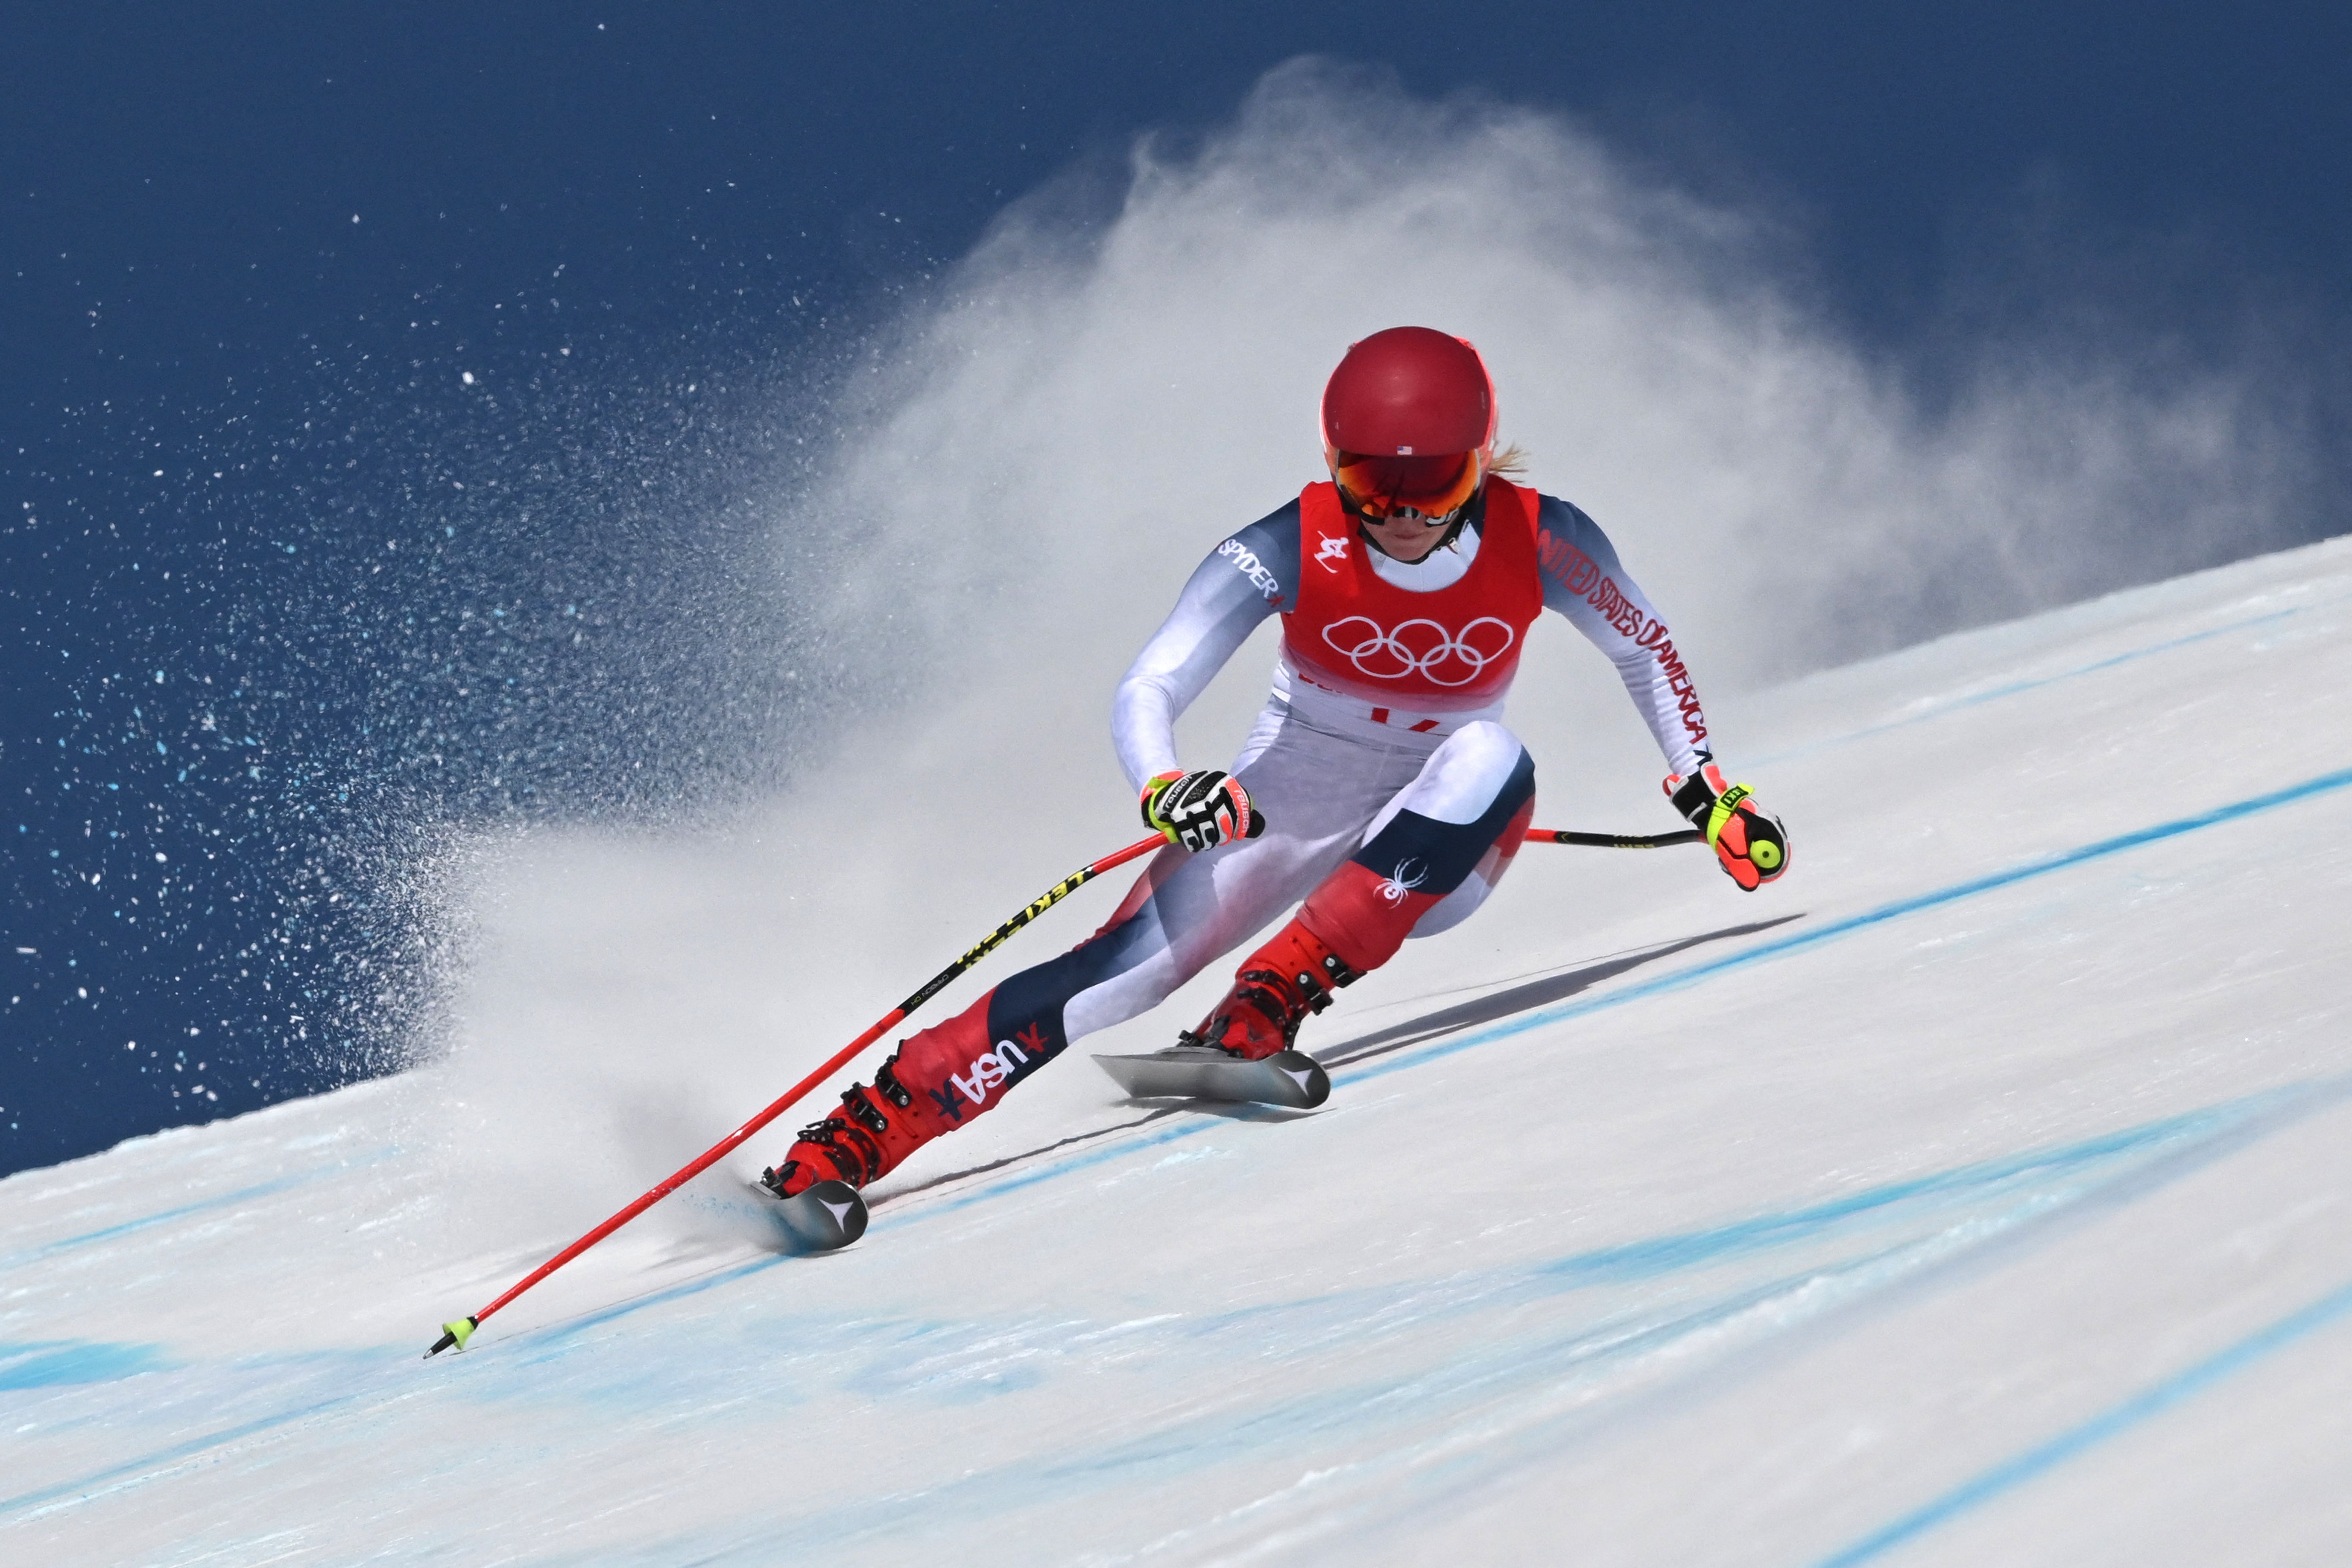 Team USA's Mikaela Shiffrin competes in the womens downhill final during the 2022 Winter Olympic Games